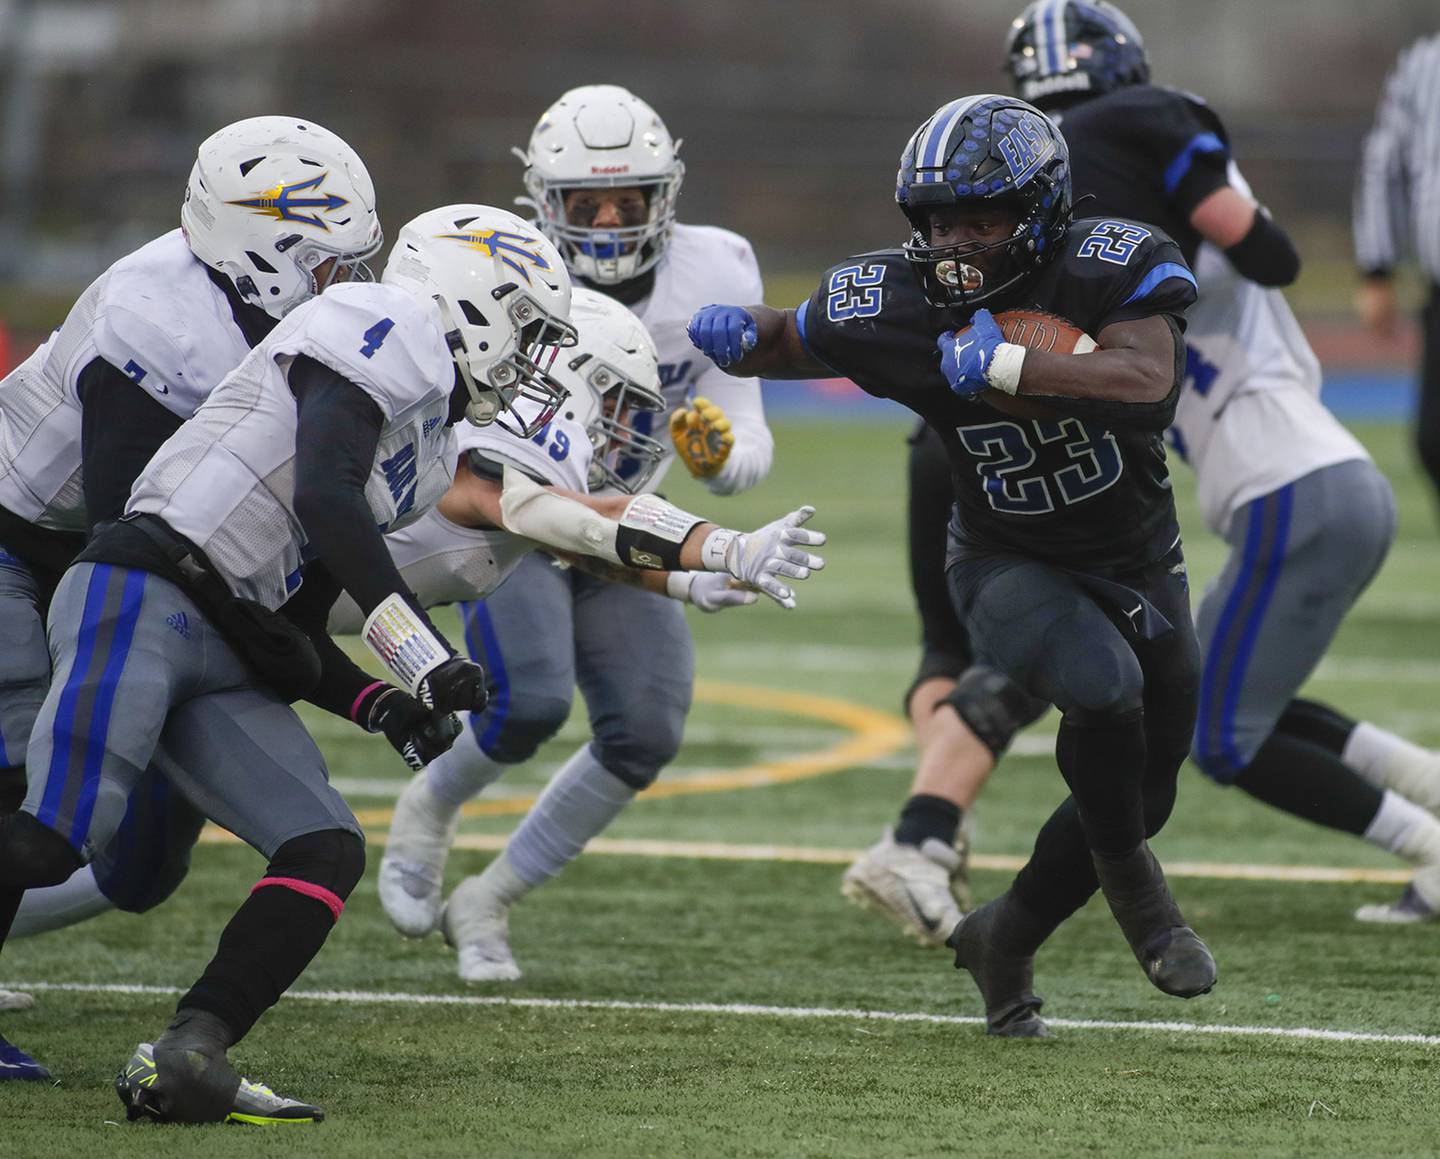 Lincoln-Way East’s Petey Olaleye (23) runs the ball against Warren’s Jaden Turner (4) during a Class 8A state quarterfinal game in Frankfort on Saturday, Nov. 12, 2022.